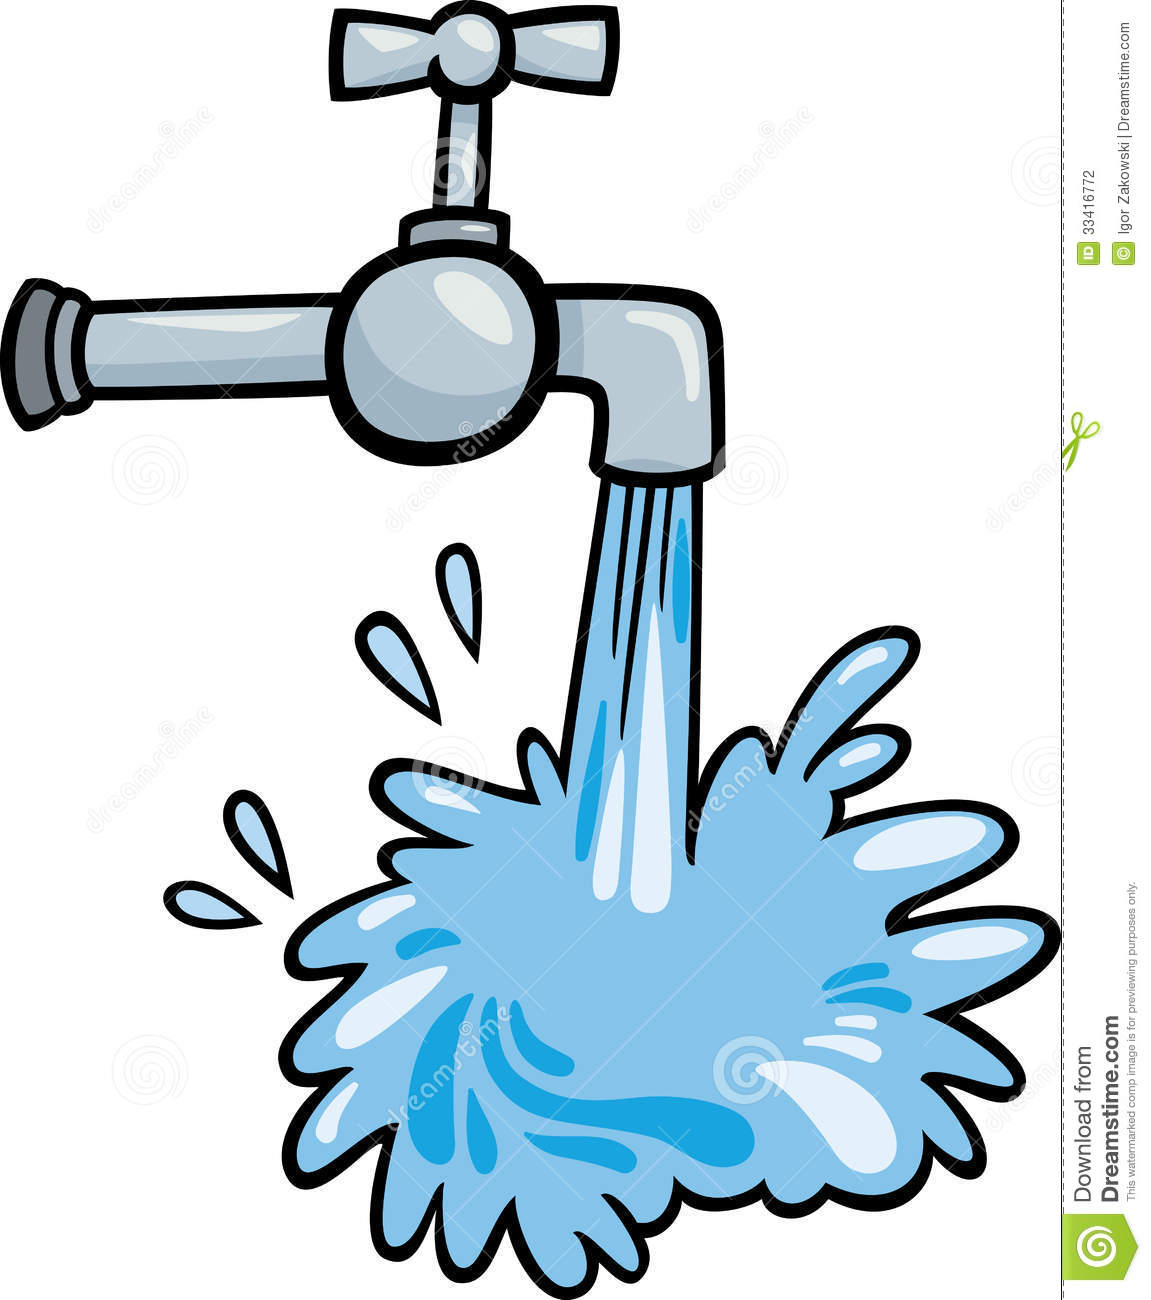 Water Faucet Clipart Black And White   Clipart Panda   Free Clipart    